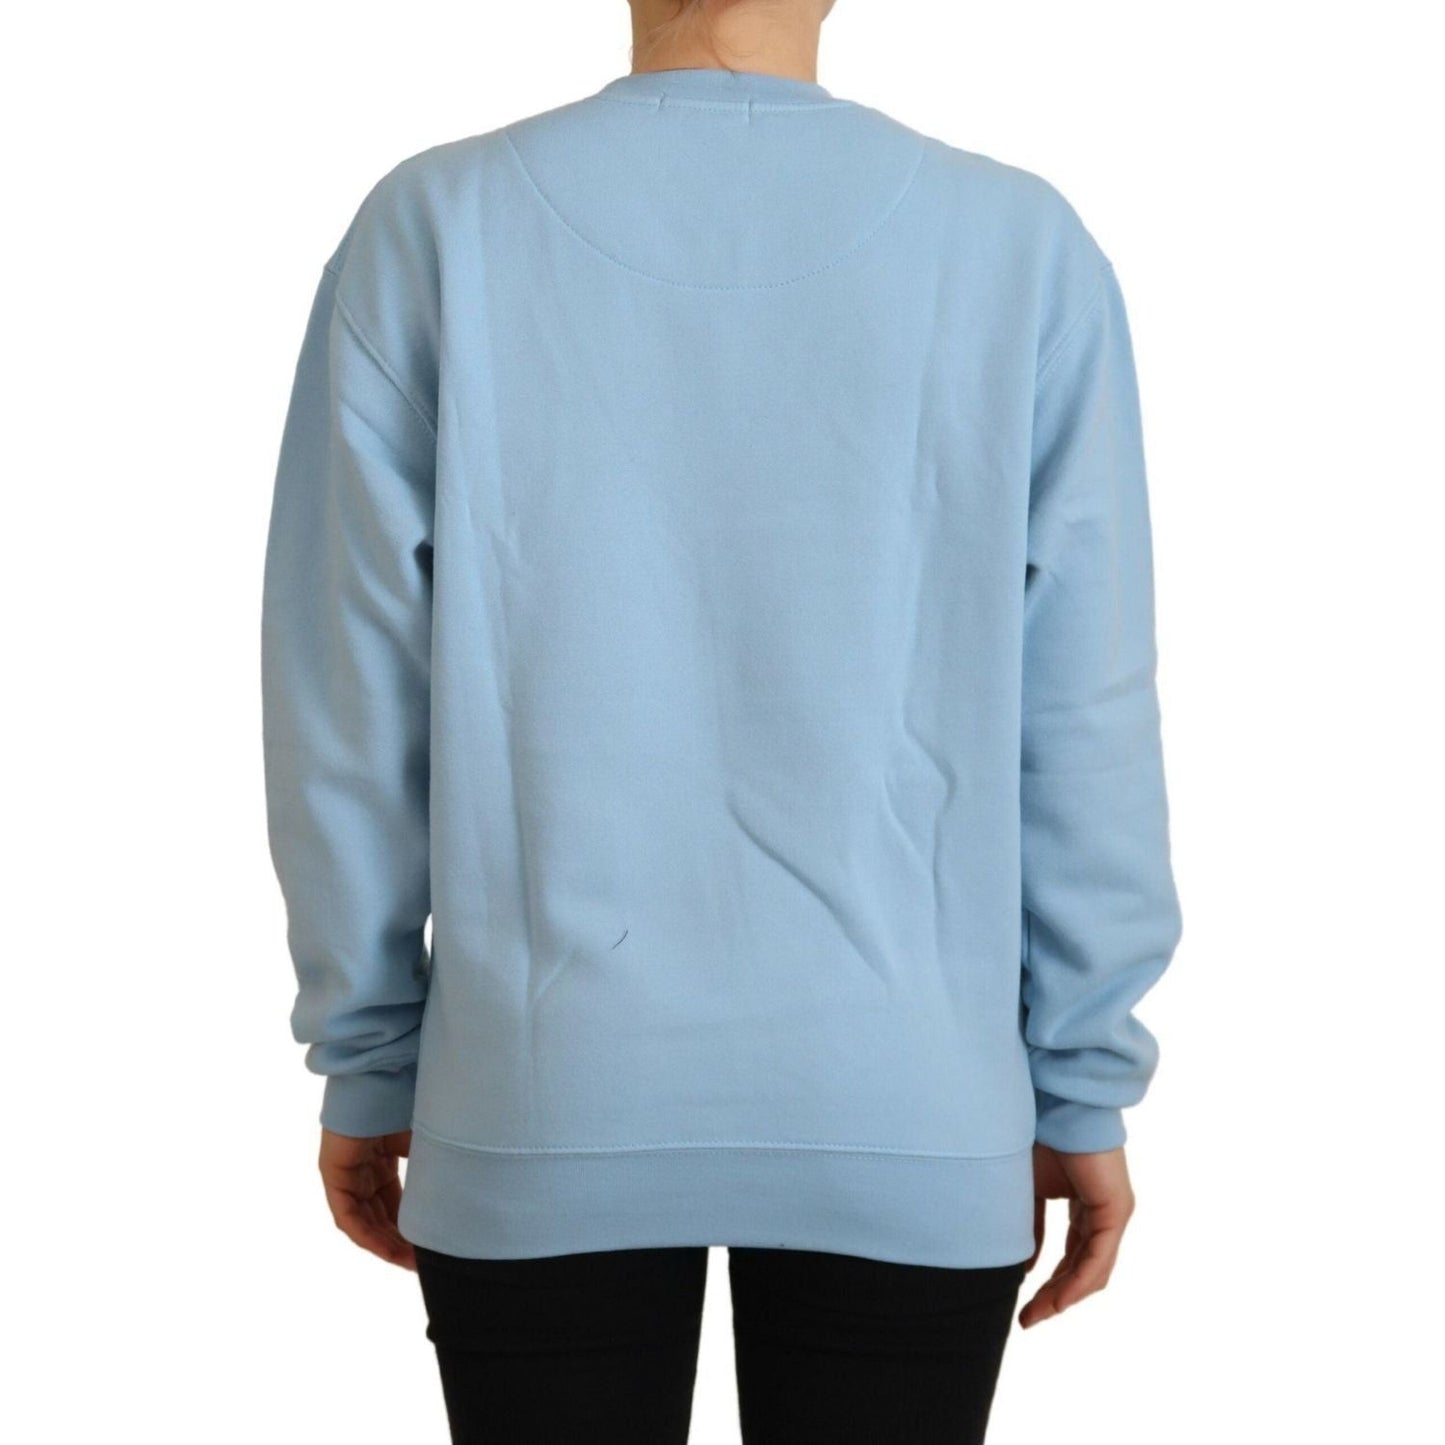 Philippe Model Chic Light Blue Logo Embellished Sweater light-blue-logo-printed-long-sleeves-sweater IMG_9227-scaled-21bd554a-6e5.jpg